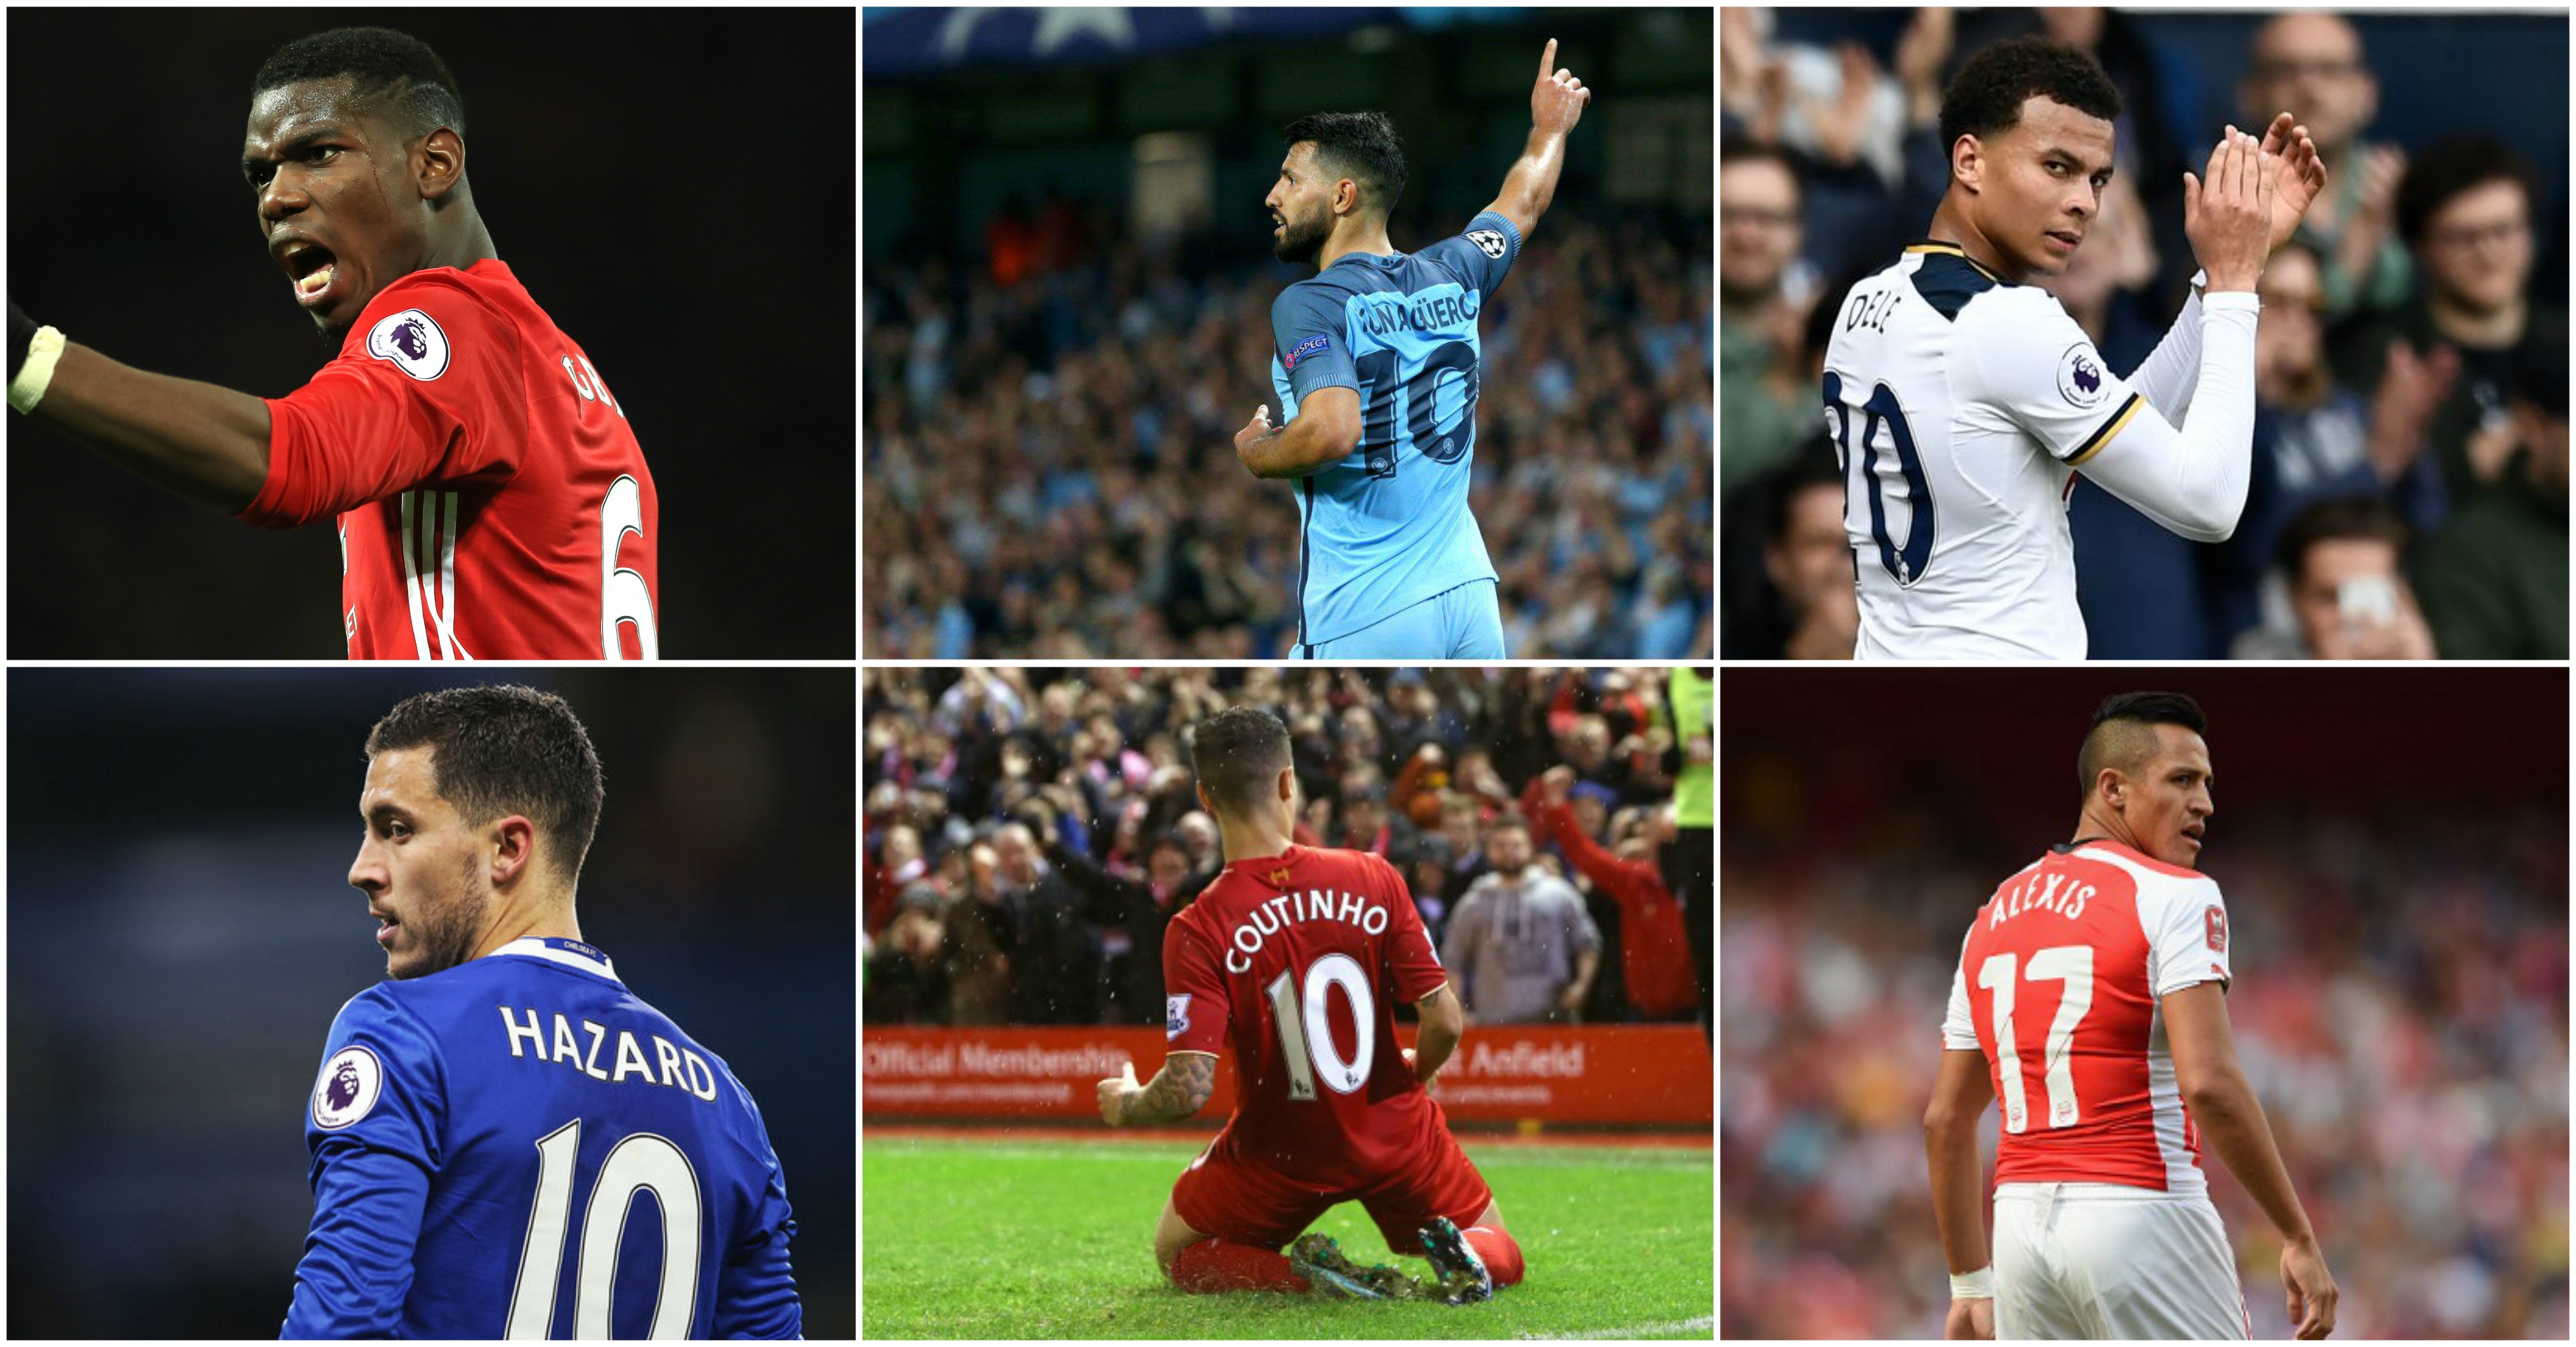 Premier League on Citi FM: Who will be Player of the Year?